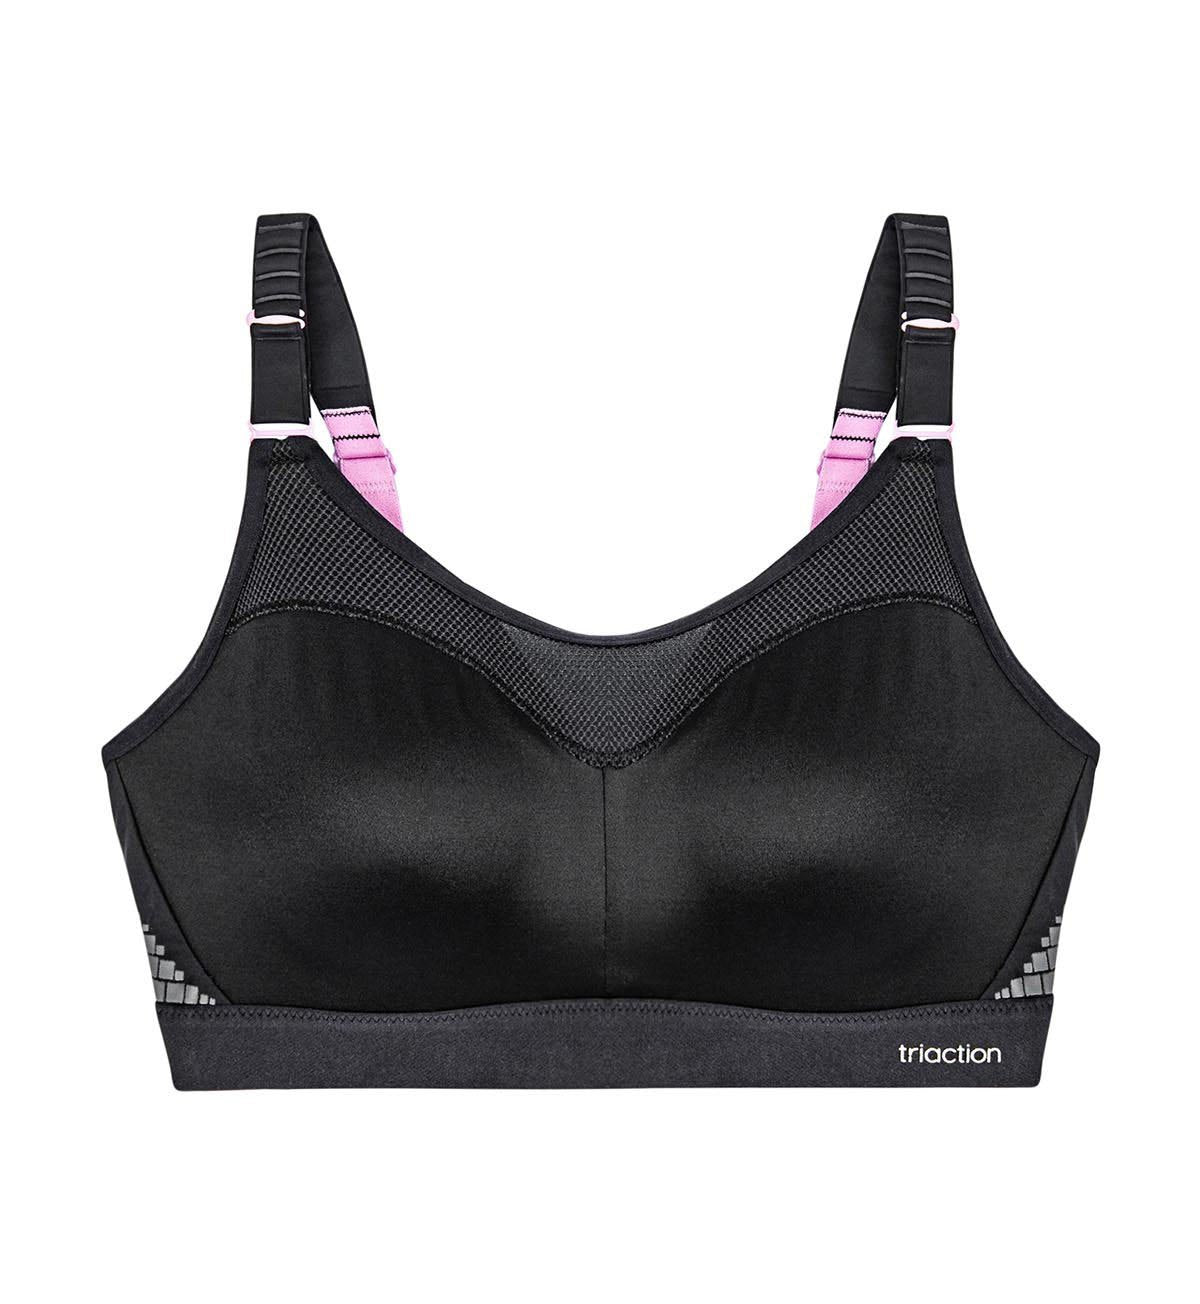 Buy Asean Sports Padded Non-Wired Full Coverage Full Support High Intensity Sports  Bra - Grey Online